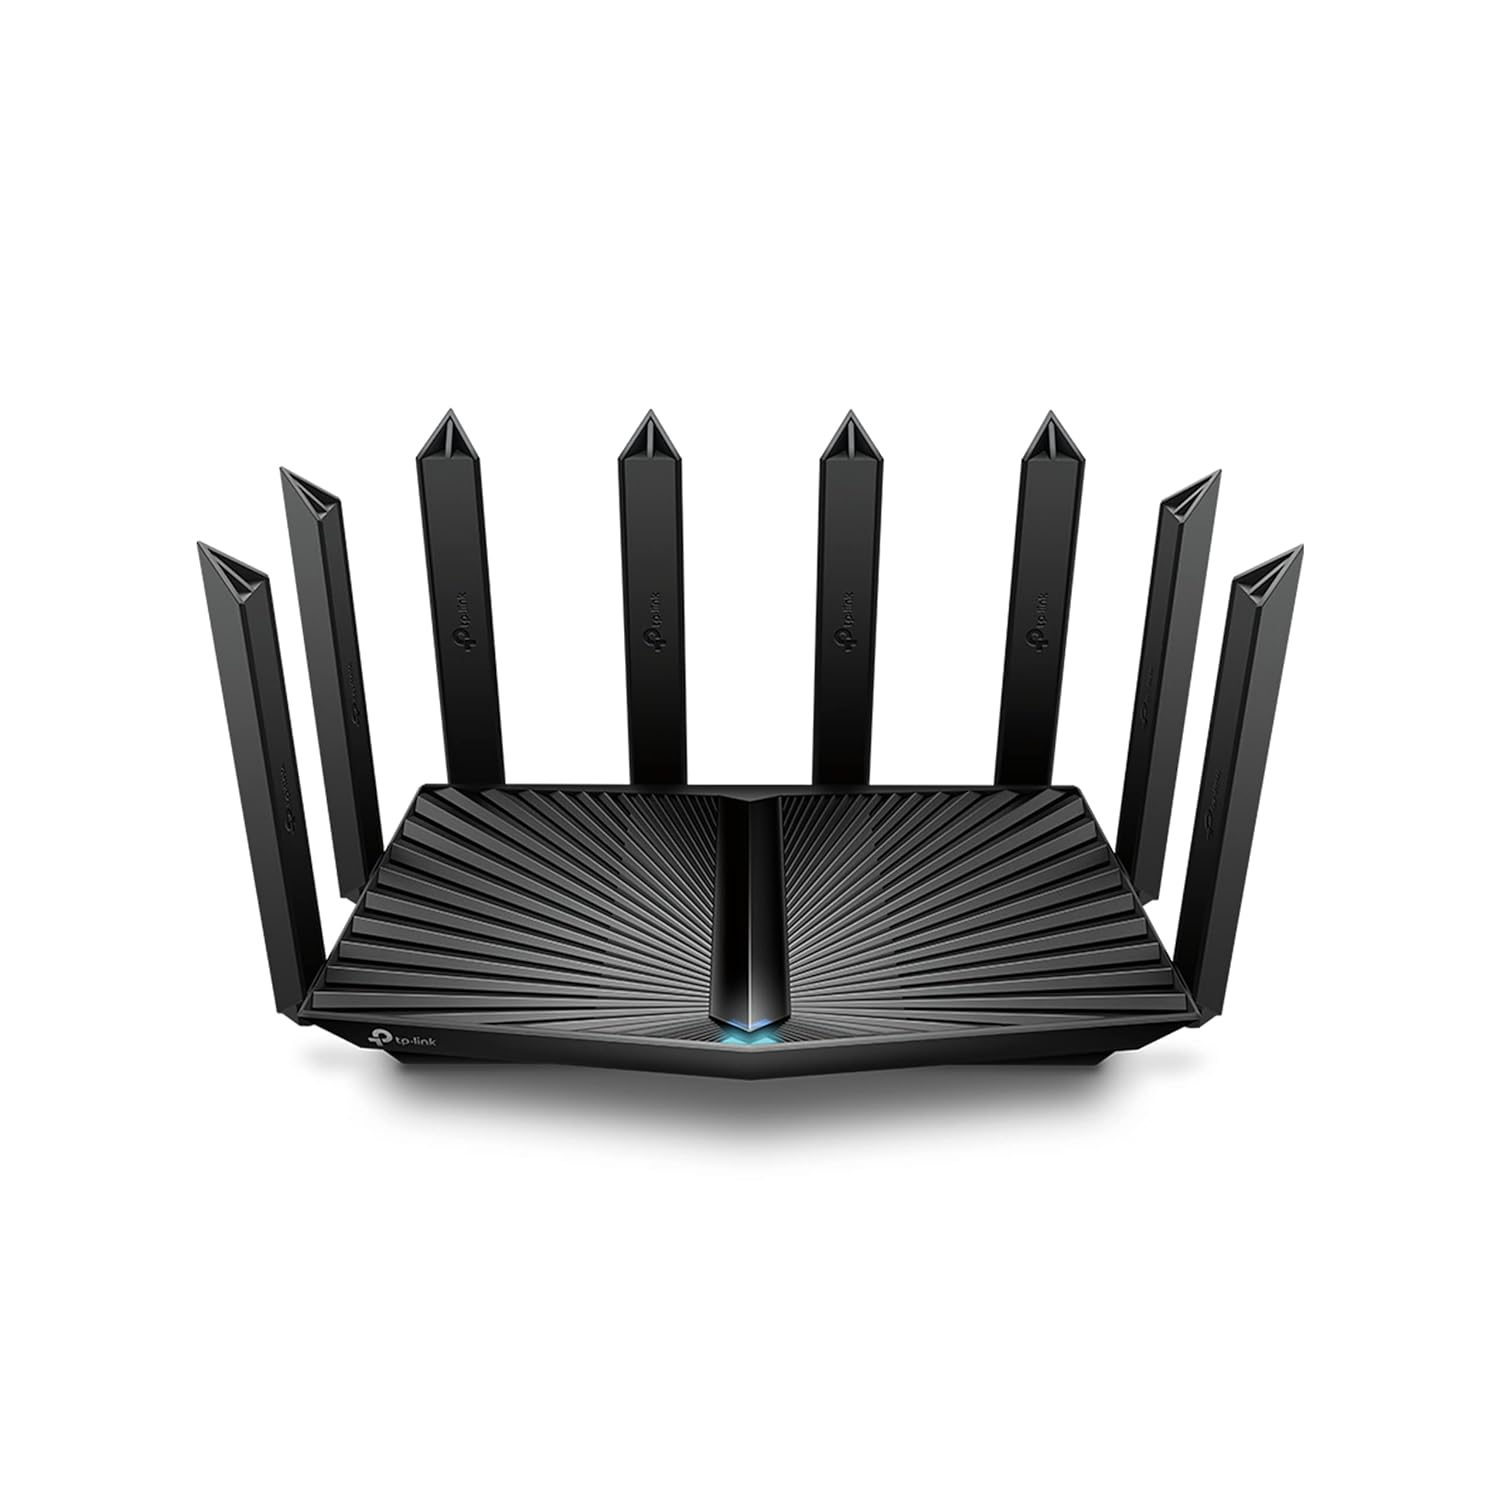 TP-Link AX6000 Wi-Fi 6 Router (Archer AX80) – Dual Band, 2.5 Gbps WAN/LAN Port, 8K Streaming,Wireless Internet Router with On…